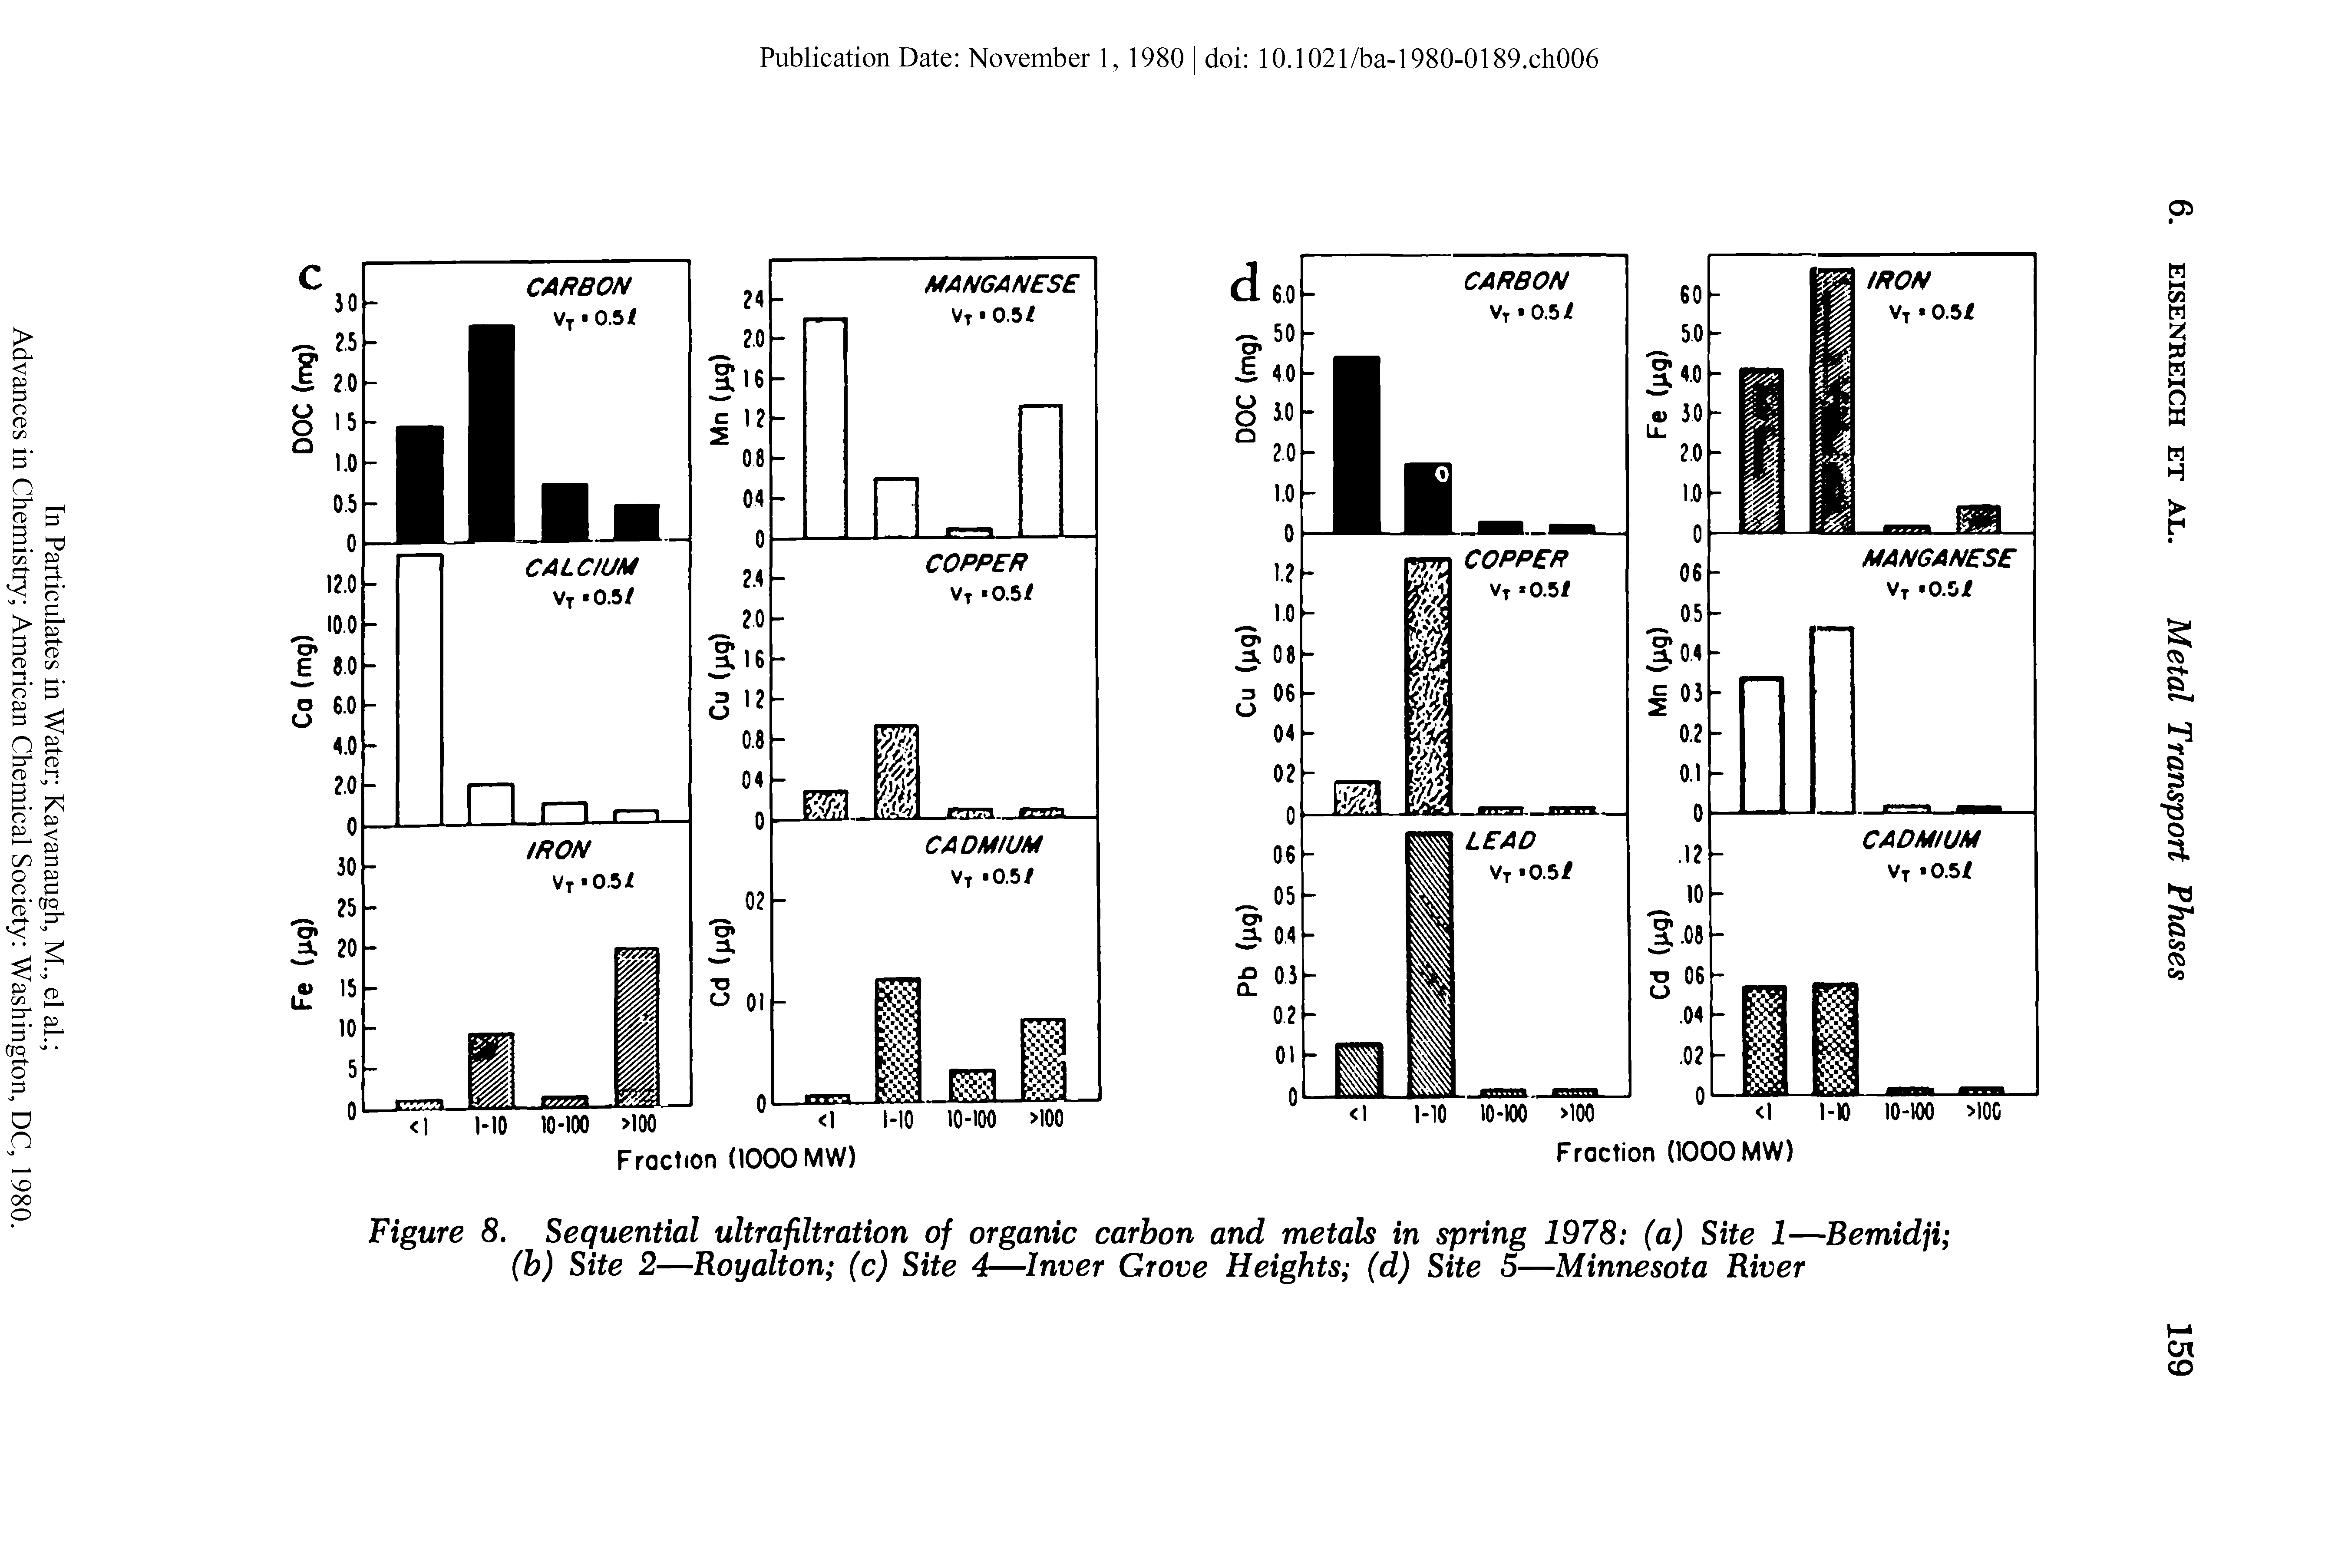 Figure 8. Sequential ultrafiltration of organic carbon and metals in spring 1978 (a) Site 1—Bemidji (b) Site 2—Royalton (c) Site 4—Inver Grove Heights (d) Site 5—Minnesota River...